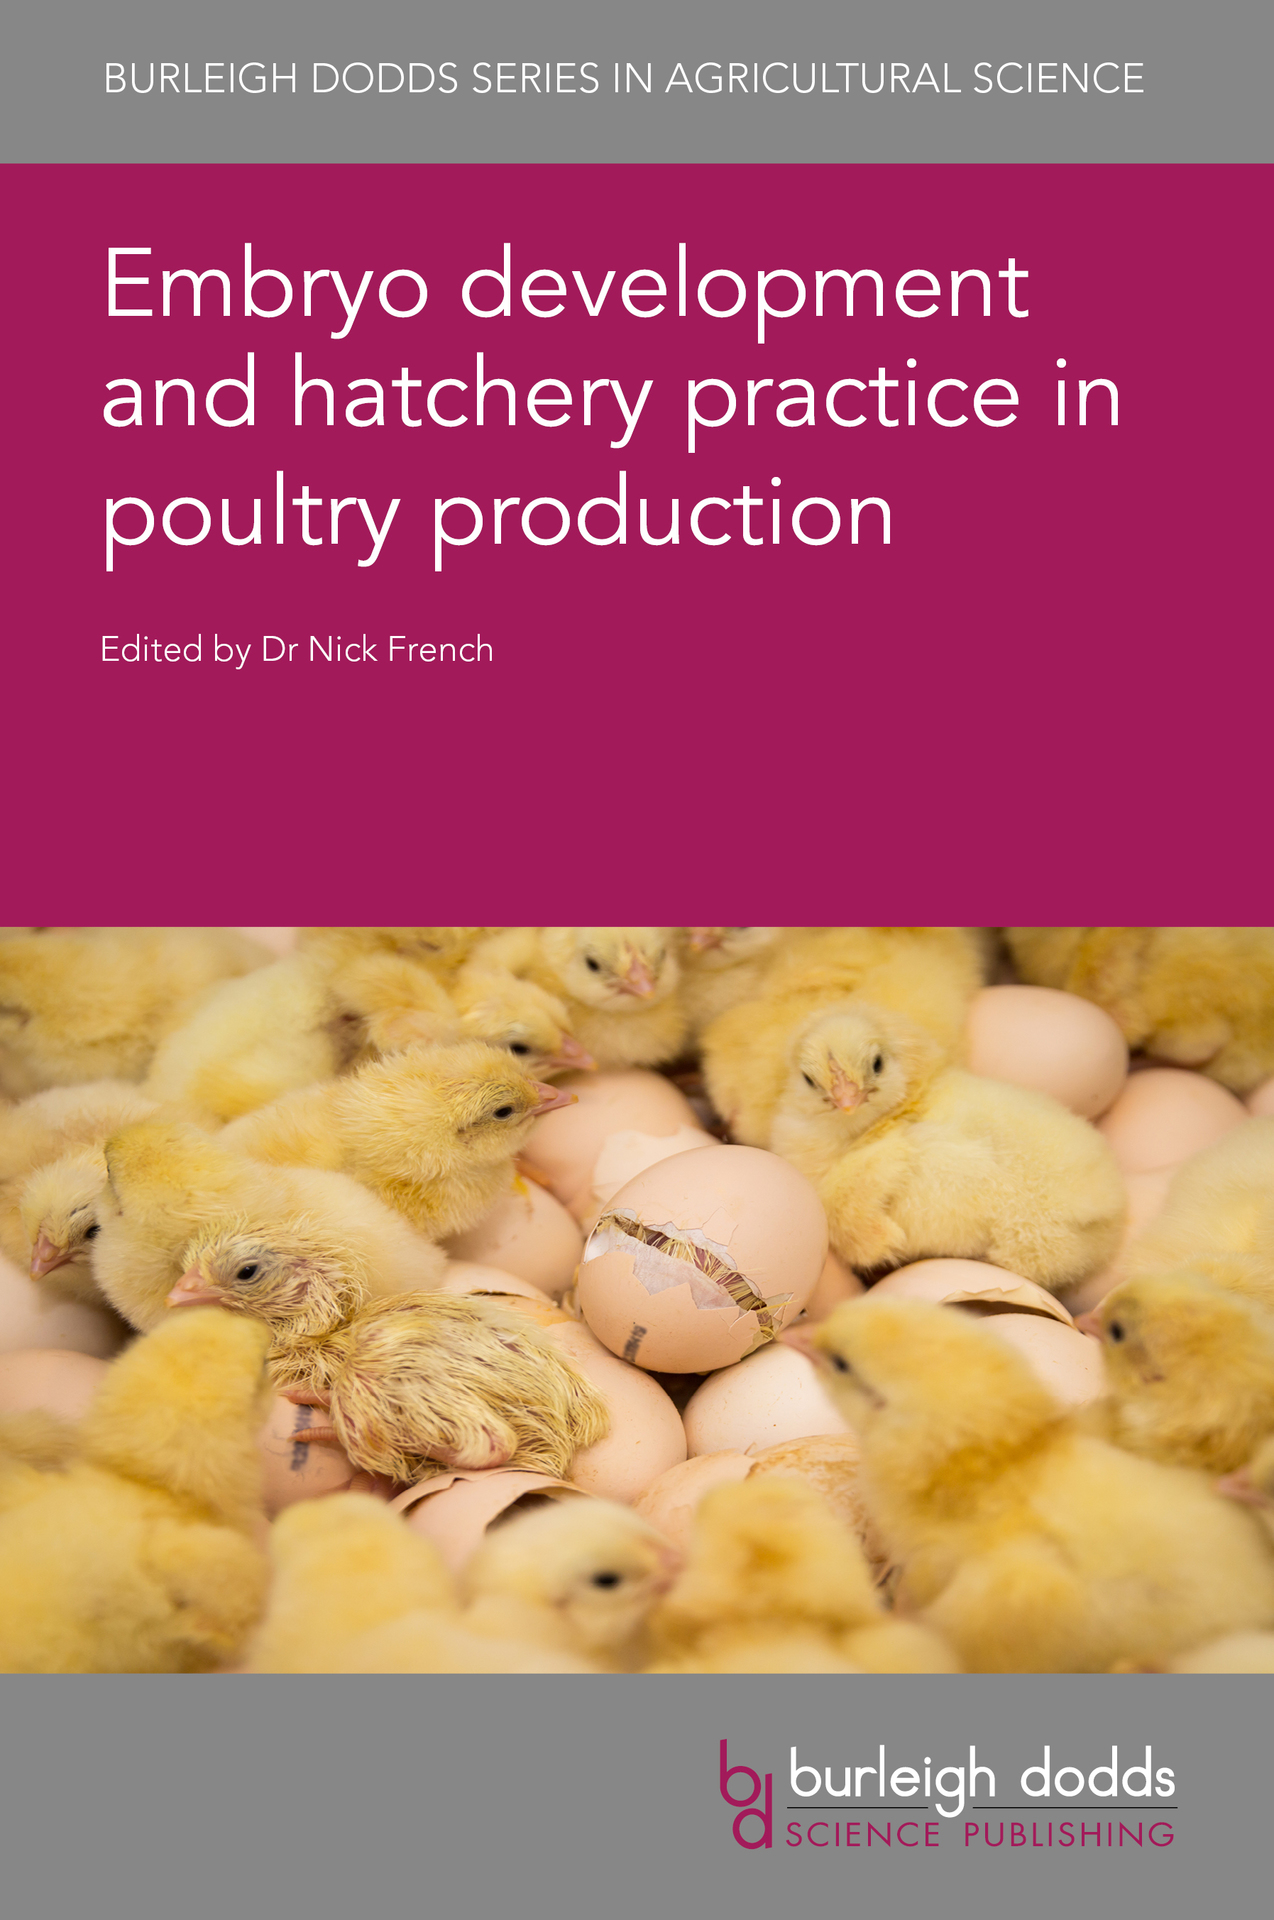 Embryo development and hatchery practice in poultry production - Cover image